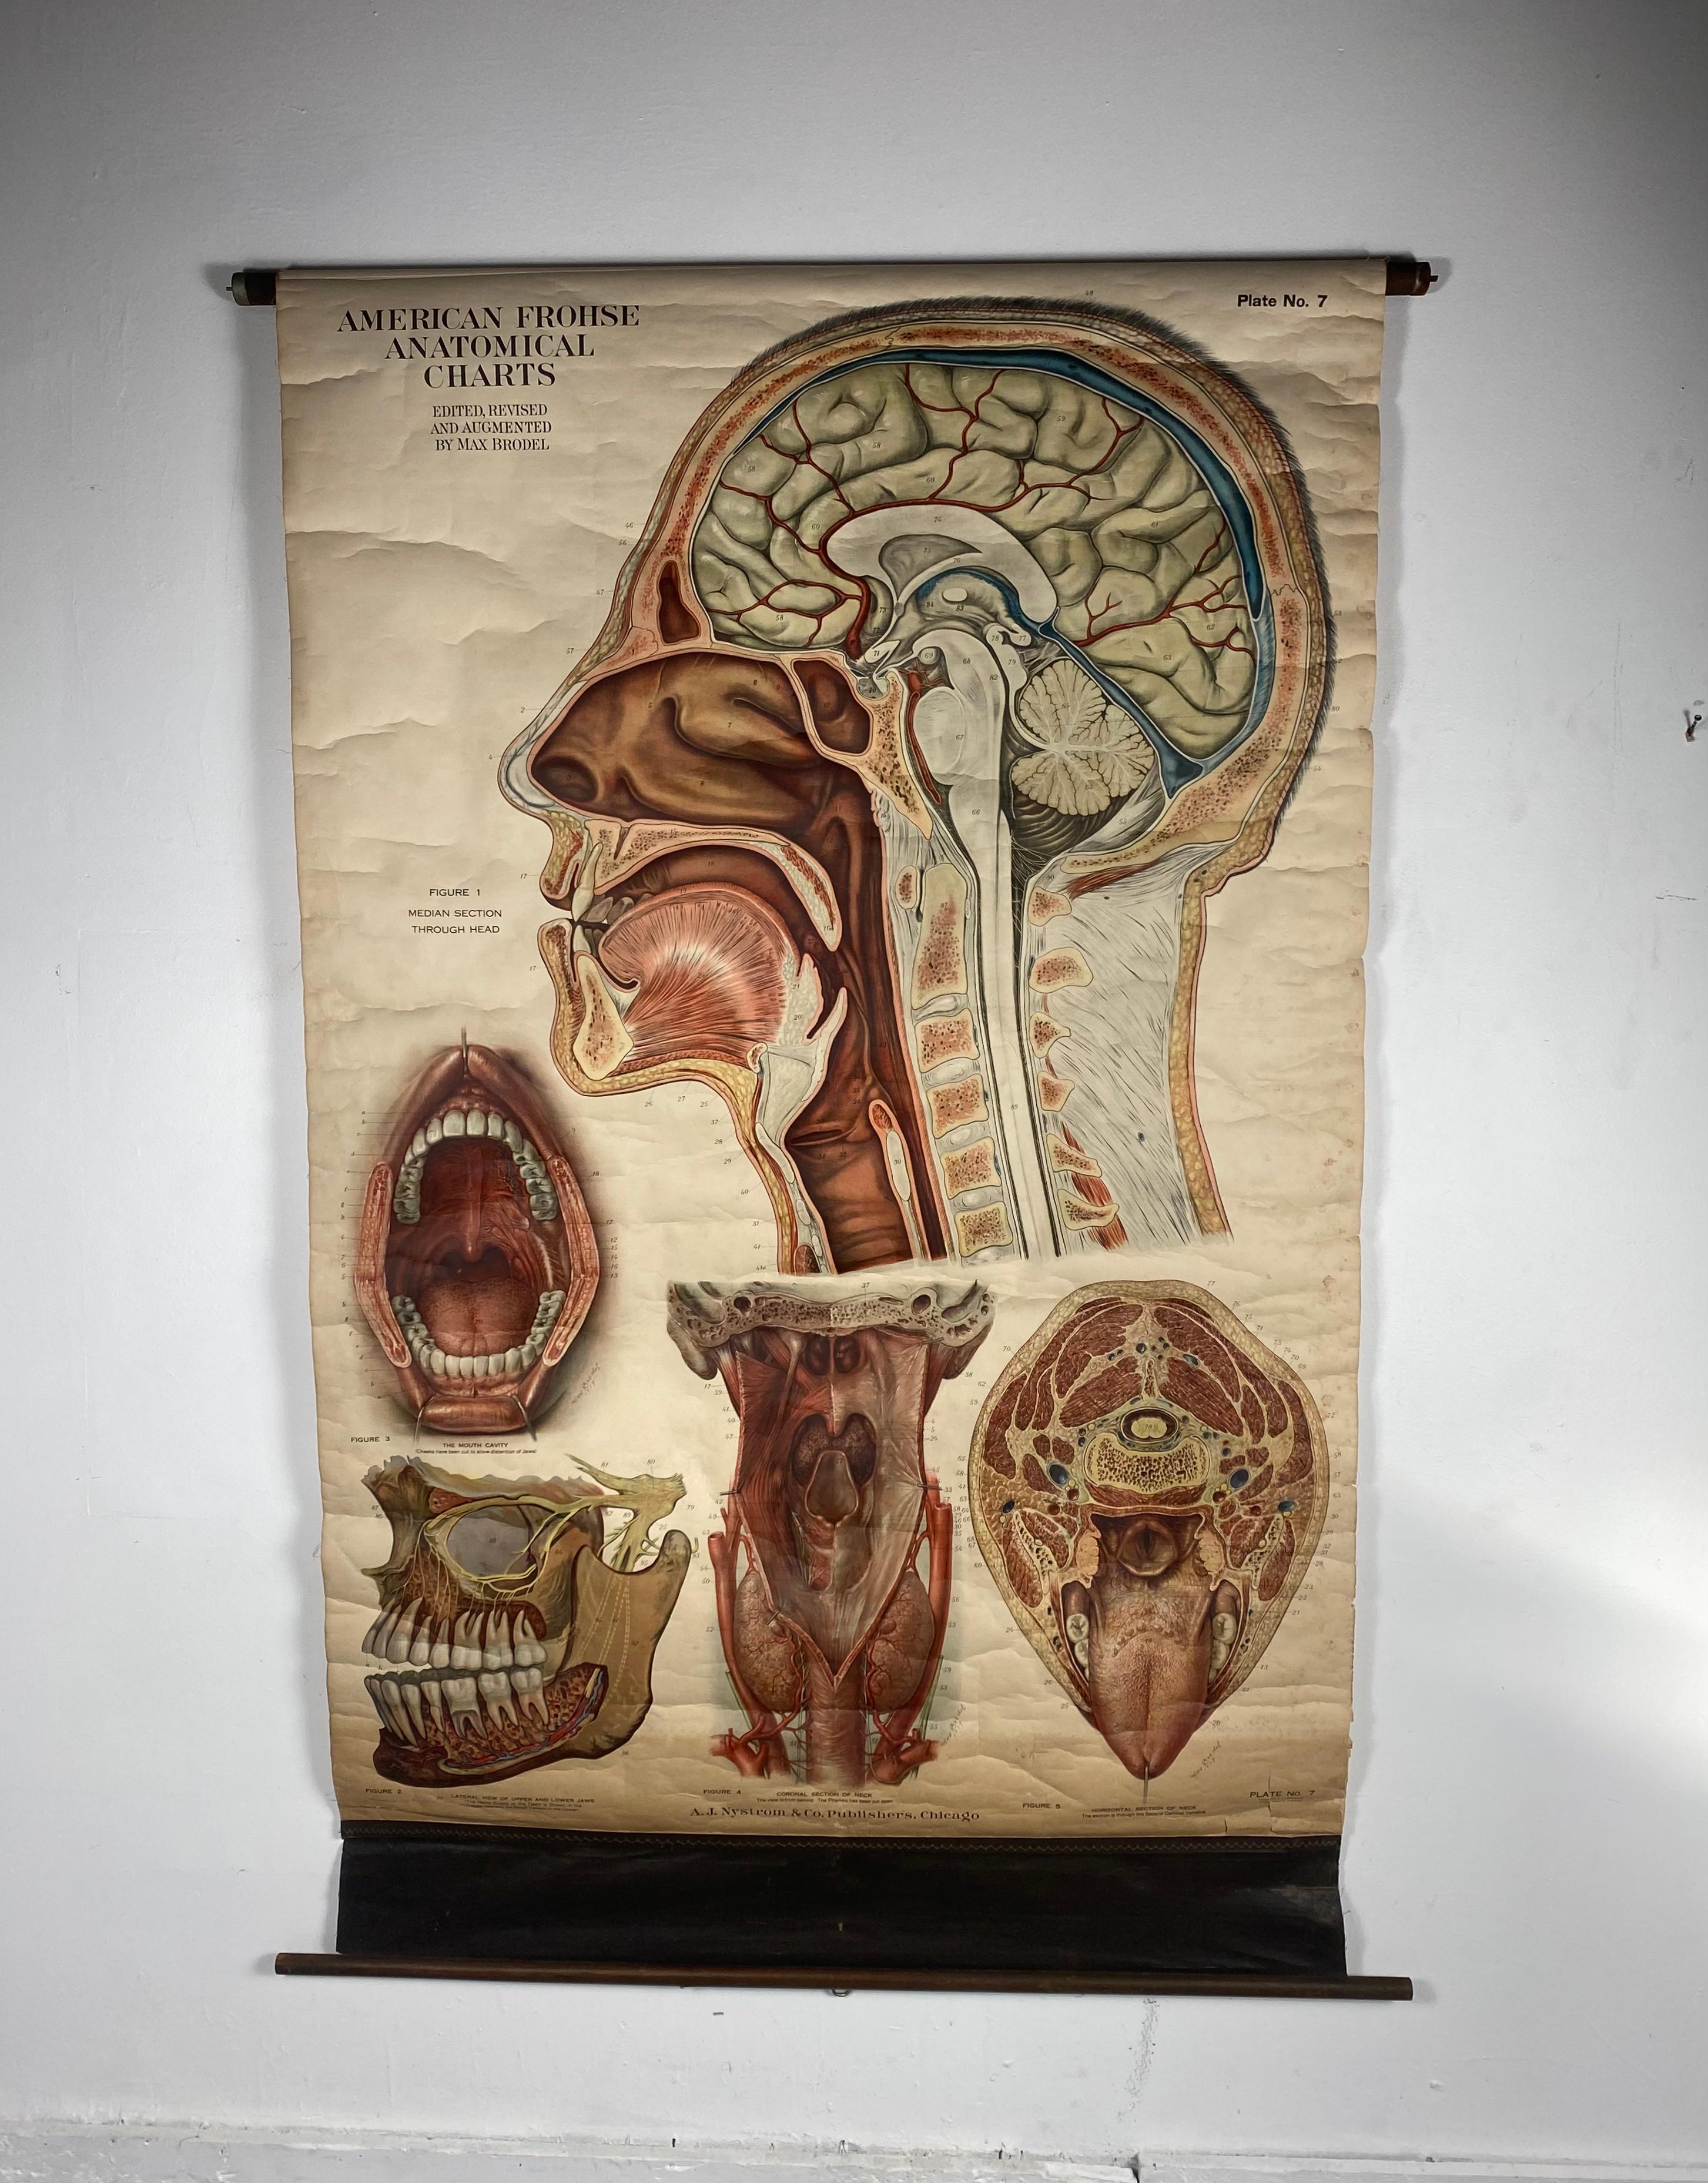 Antique American Frohse Anatomical pull down chart, by A. J. Nystrom, ,revised and augmented by Max Brodel illustrator... Amazing color, patina, age appropriate wear. dated 1918..
Max (Paul Heinrich) Brödel
1870-1941
Brödel, an illustrator and